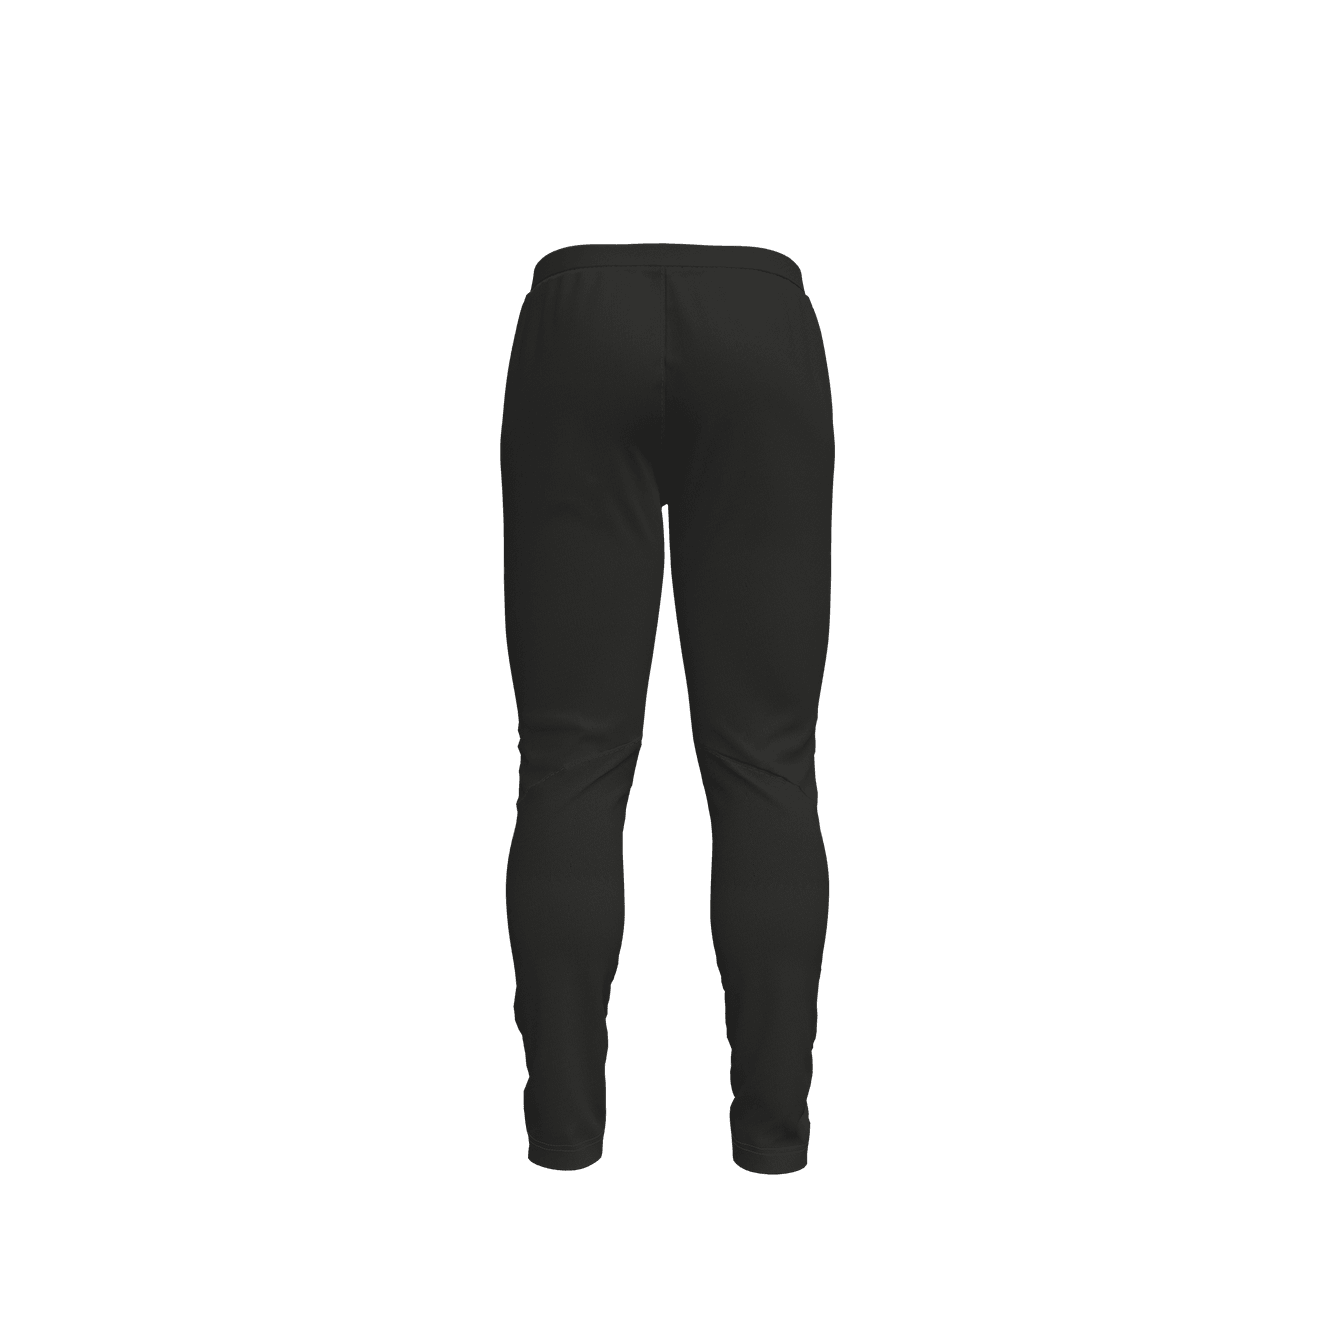 Slim Fit Knit Pant Youth